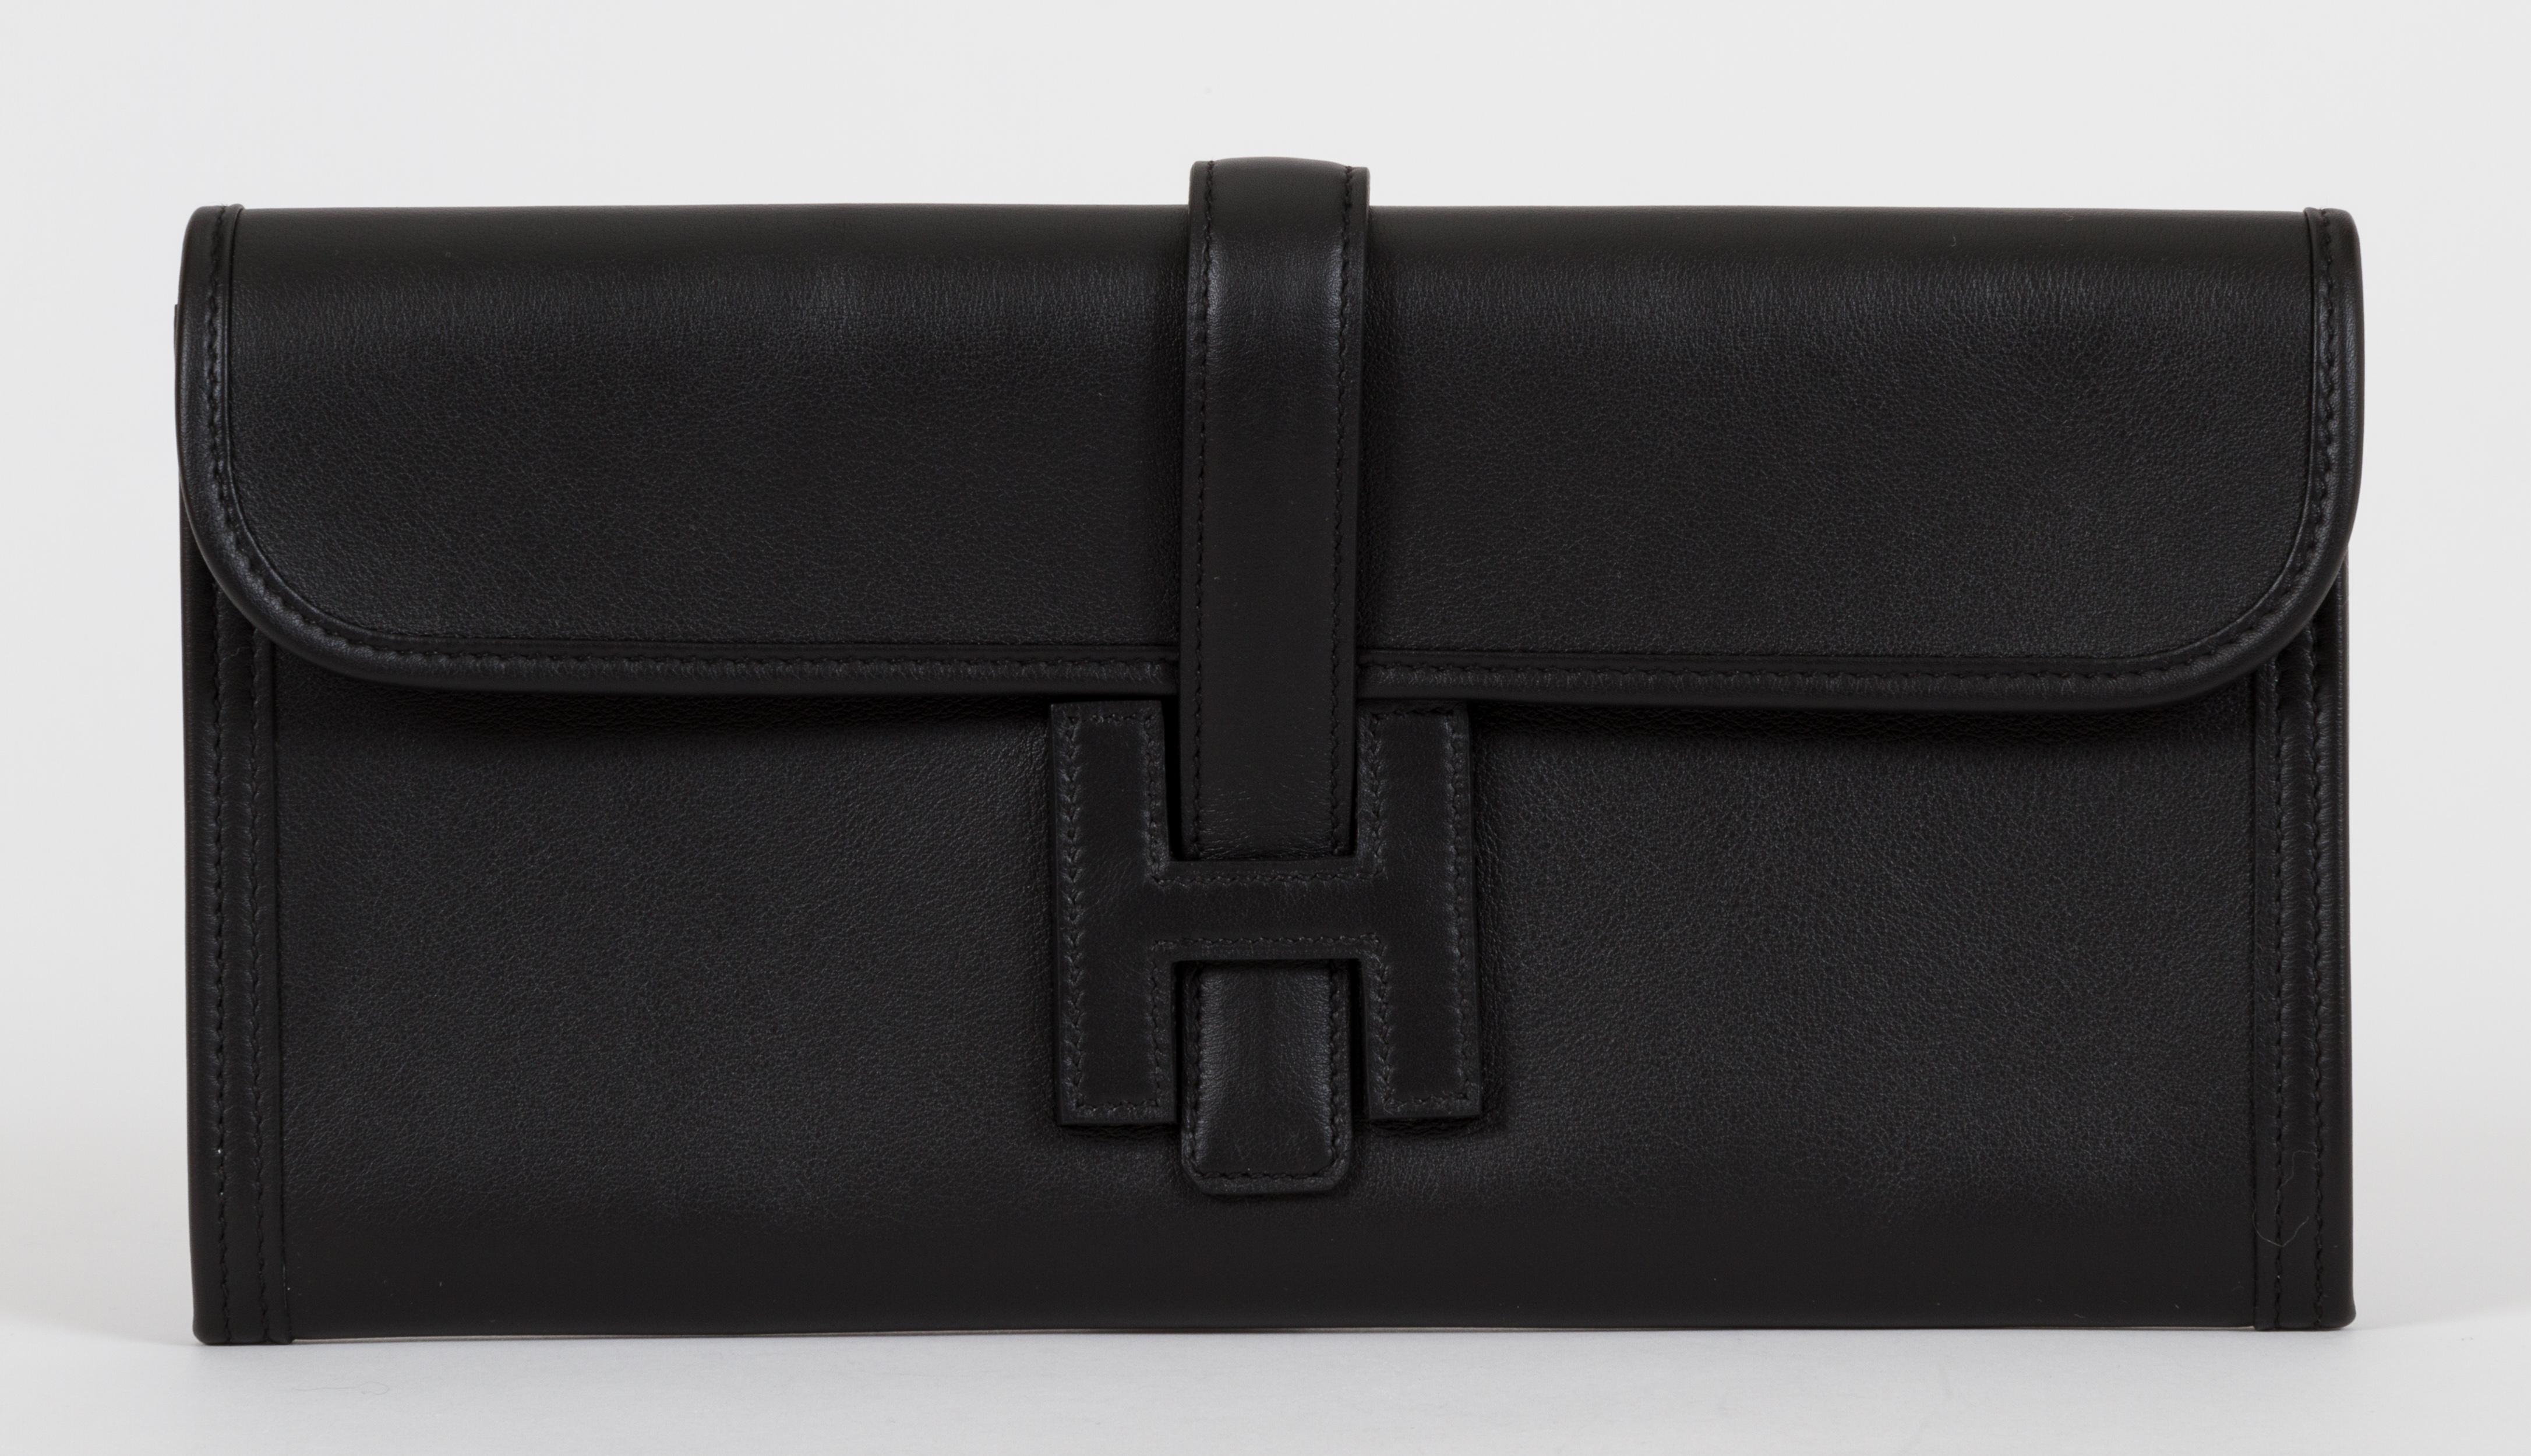 Hermès Jige clutch in black swift leather brand new in box. Letter C for 2018. Comes with original dust bag, felt, box, ribbon and blacked out copy of receipt.